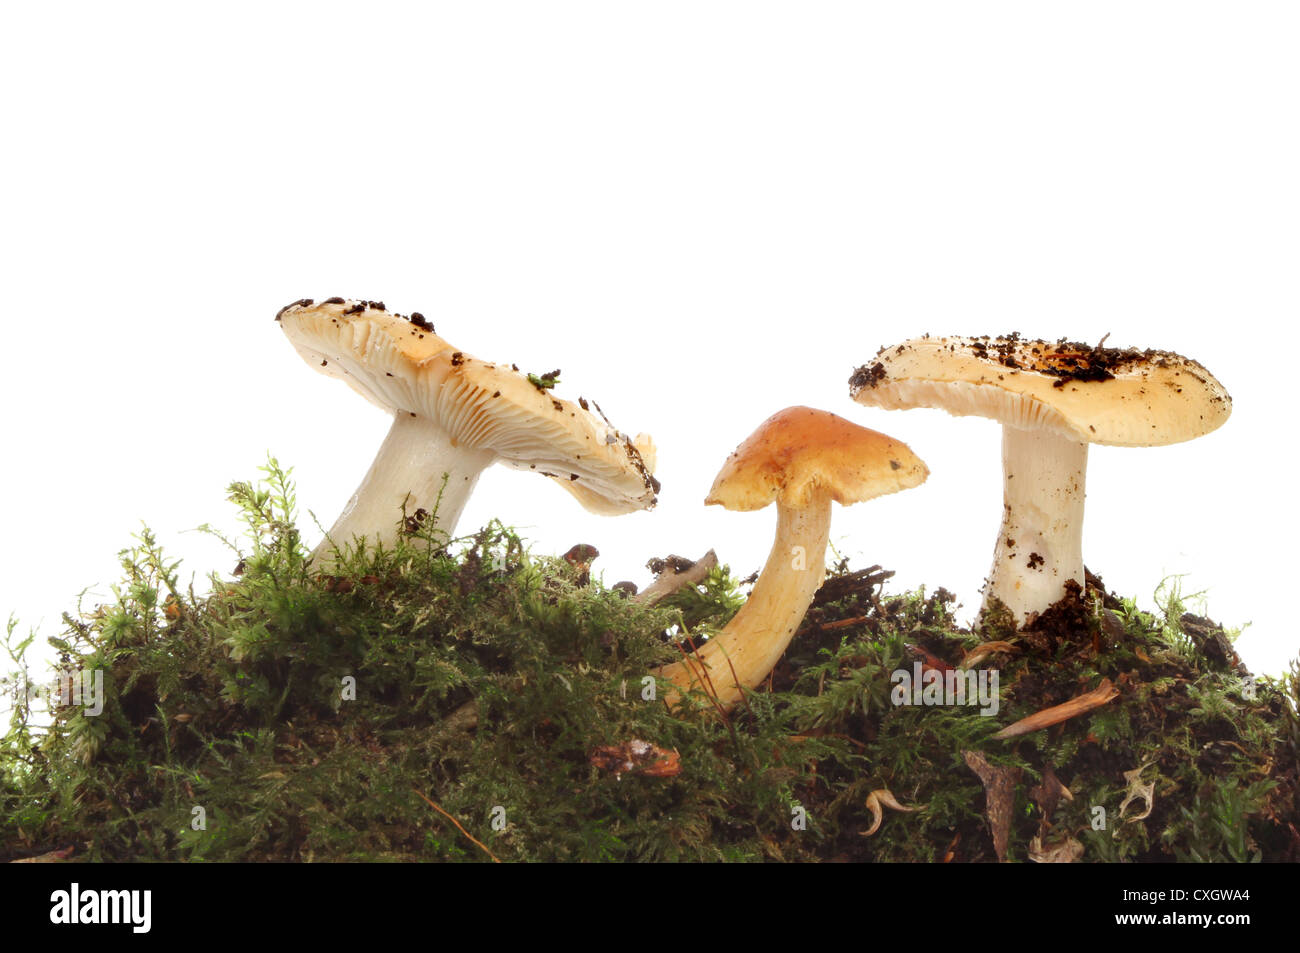 Three toadstool fungi growing in moss against a white background Stock Photo